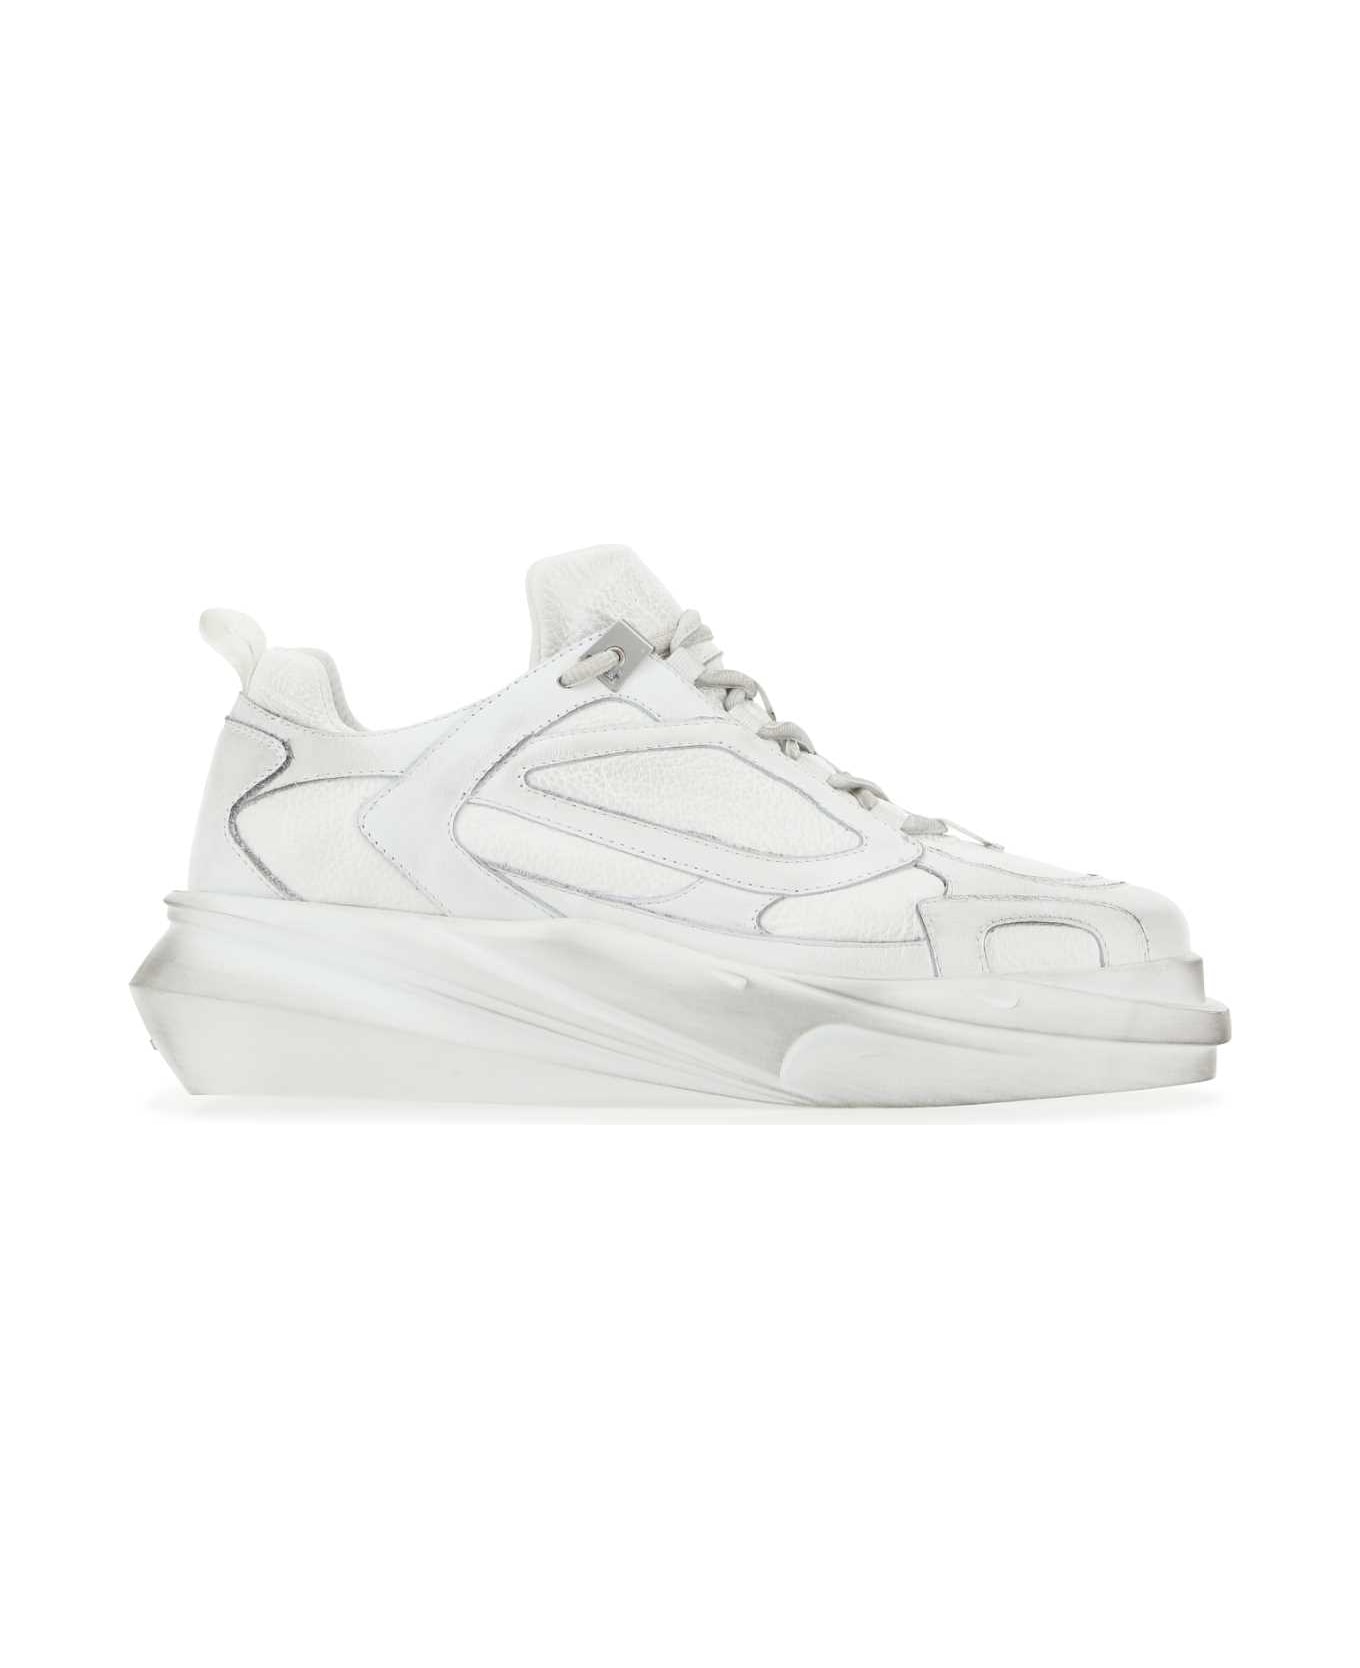 1017 ALYX 9SM White Leather Hiking Sneakers - WTH0001